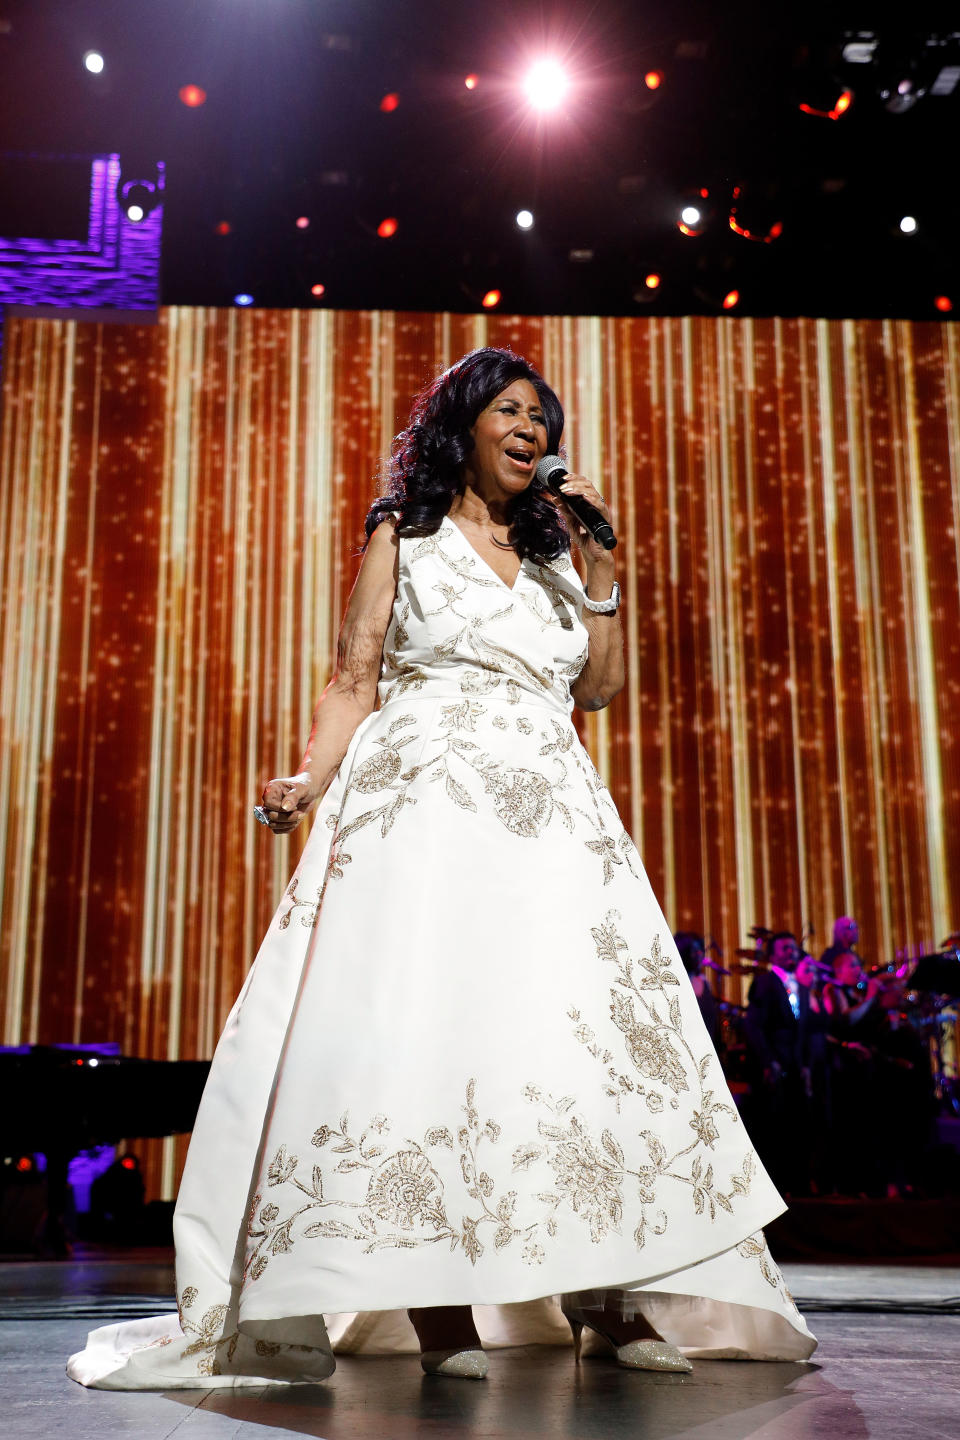 <p>Aretha Franklin wearing a glamorous white and gold A-line gown while performing at the 2017 Tribeca Film Festival Opening Gala premiere of “Clive Davis: The Soundtrack of Our Lives.” (Photo by Taylor Hill/Getty Images) </p>